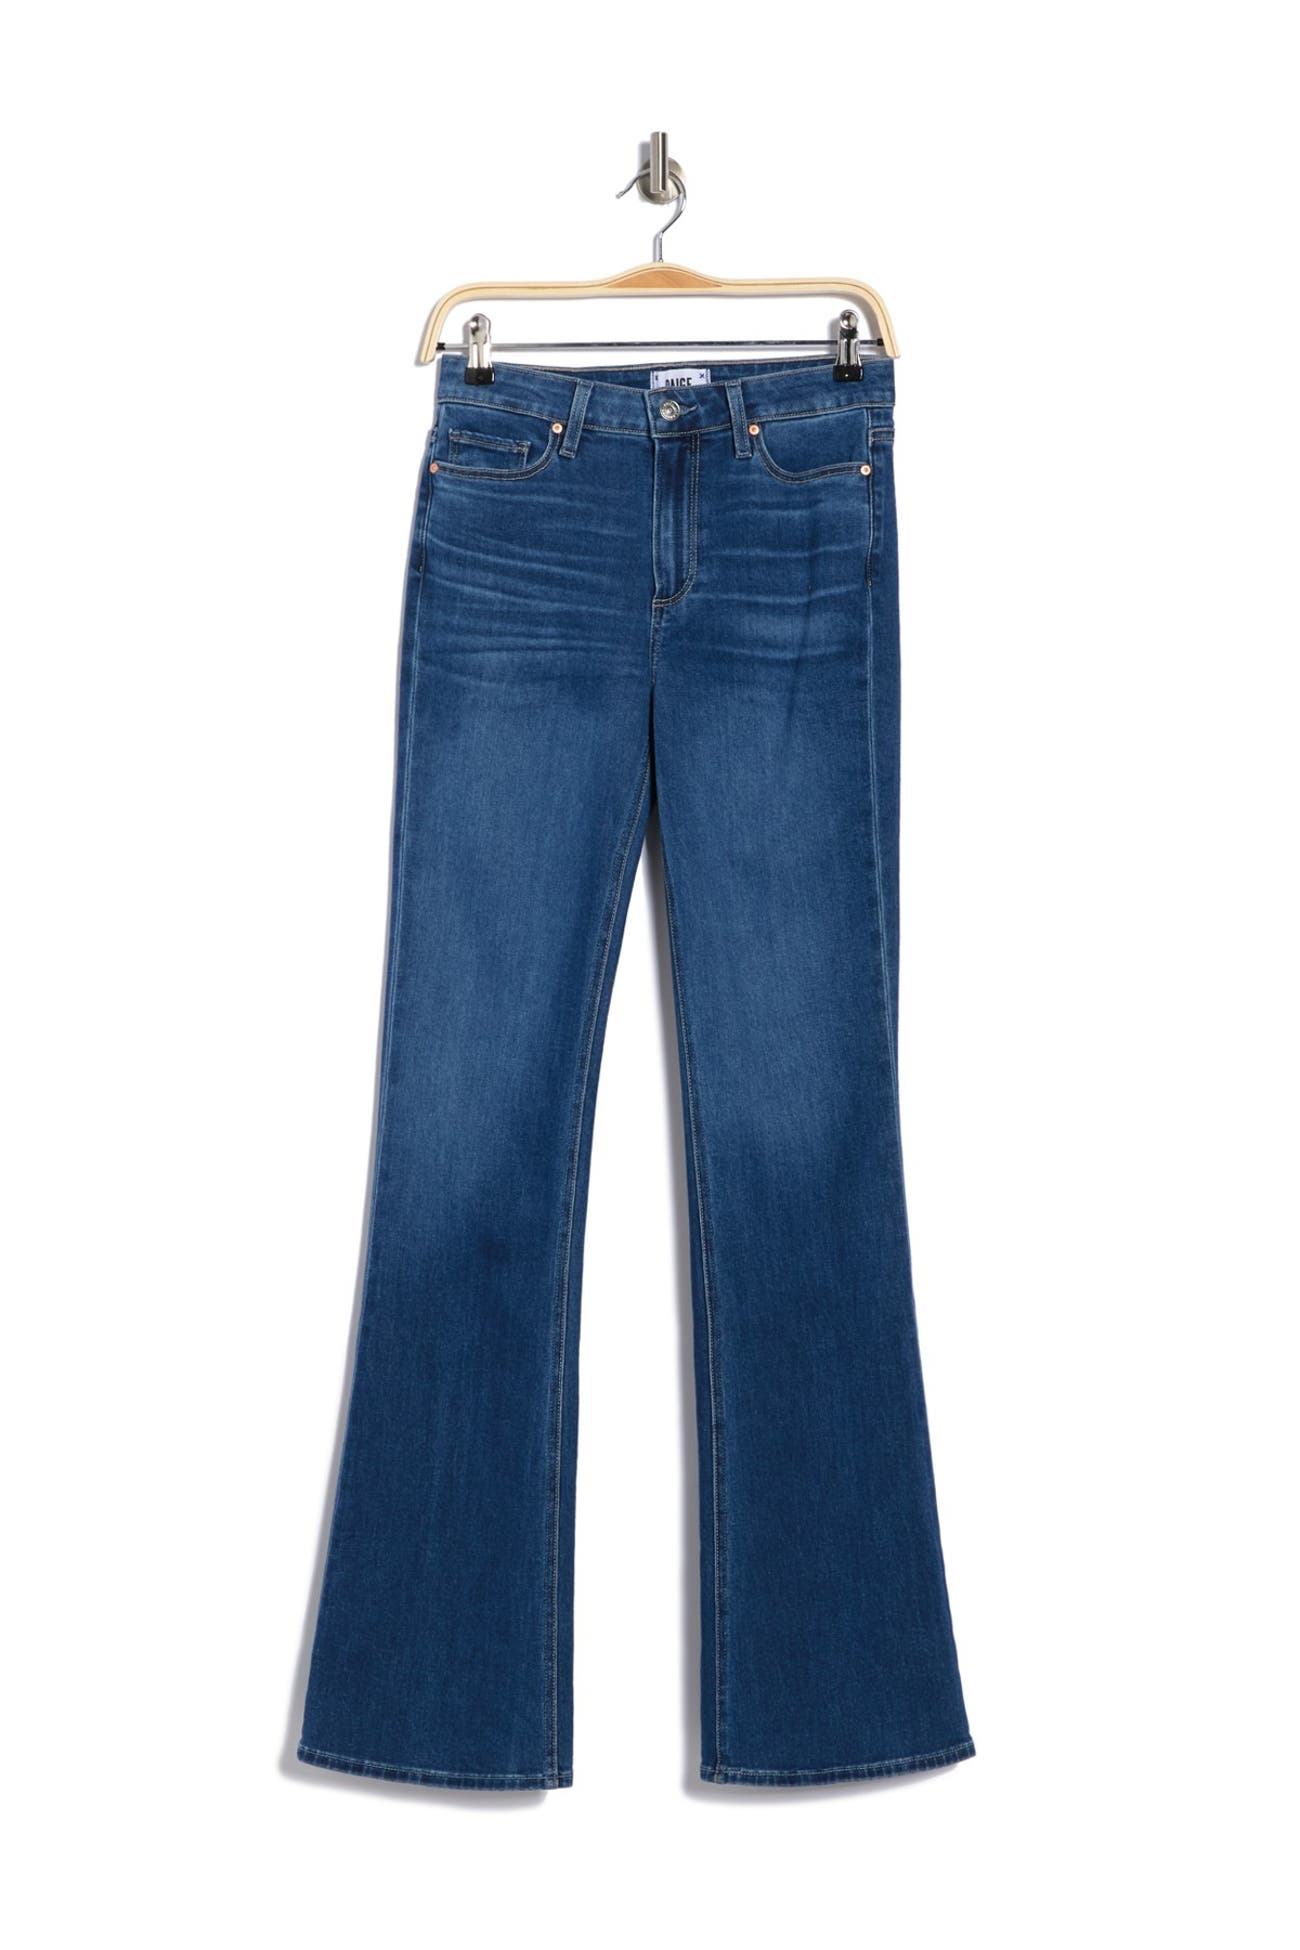 PAIGE | Laurel Canyon High Rise Bootcut Jeans | Nordstrom Rack